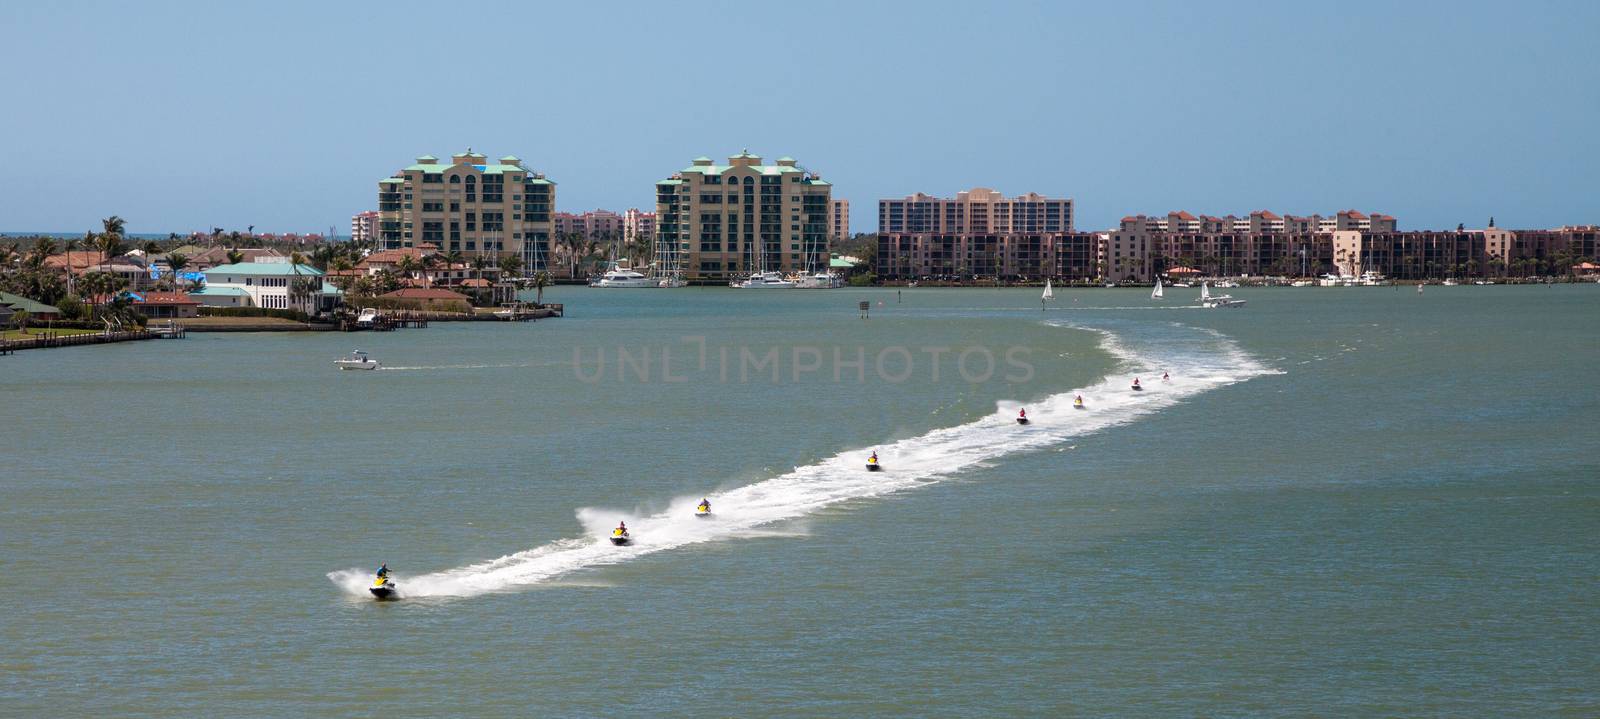 Skyline in the background as a Group of jet skies zip along the ocean in a straight line, making waves in the ocean in the bay in front of Marco Island, Florida